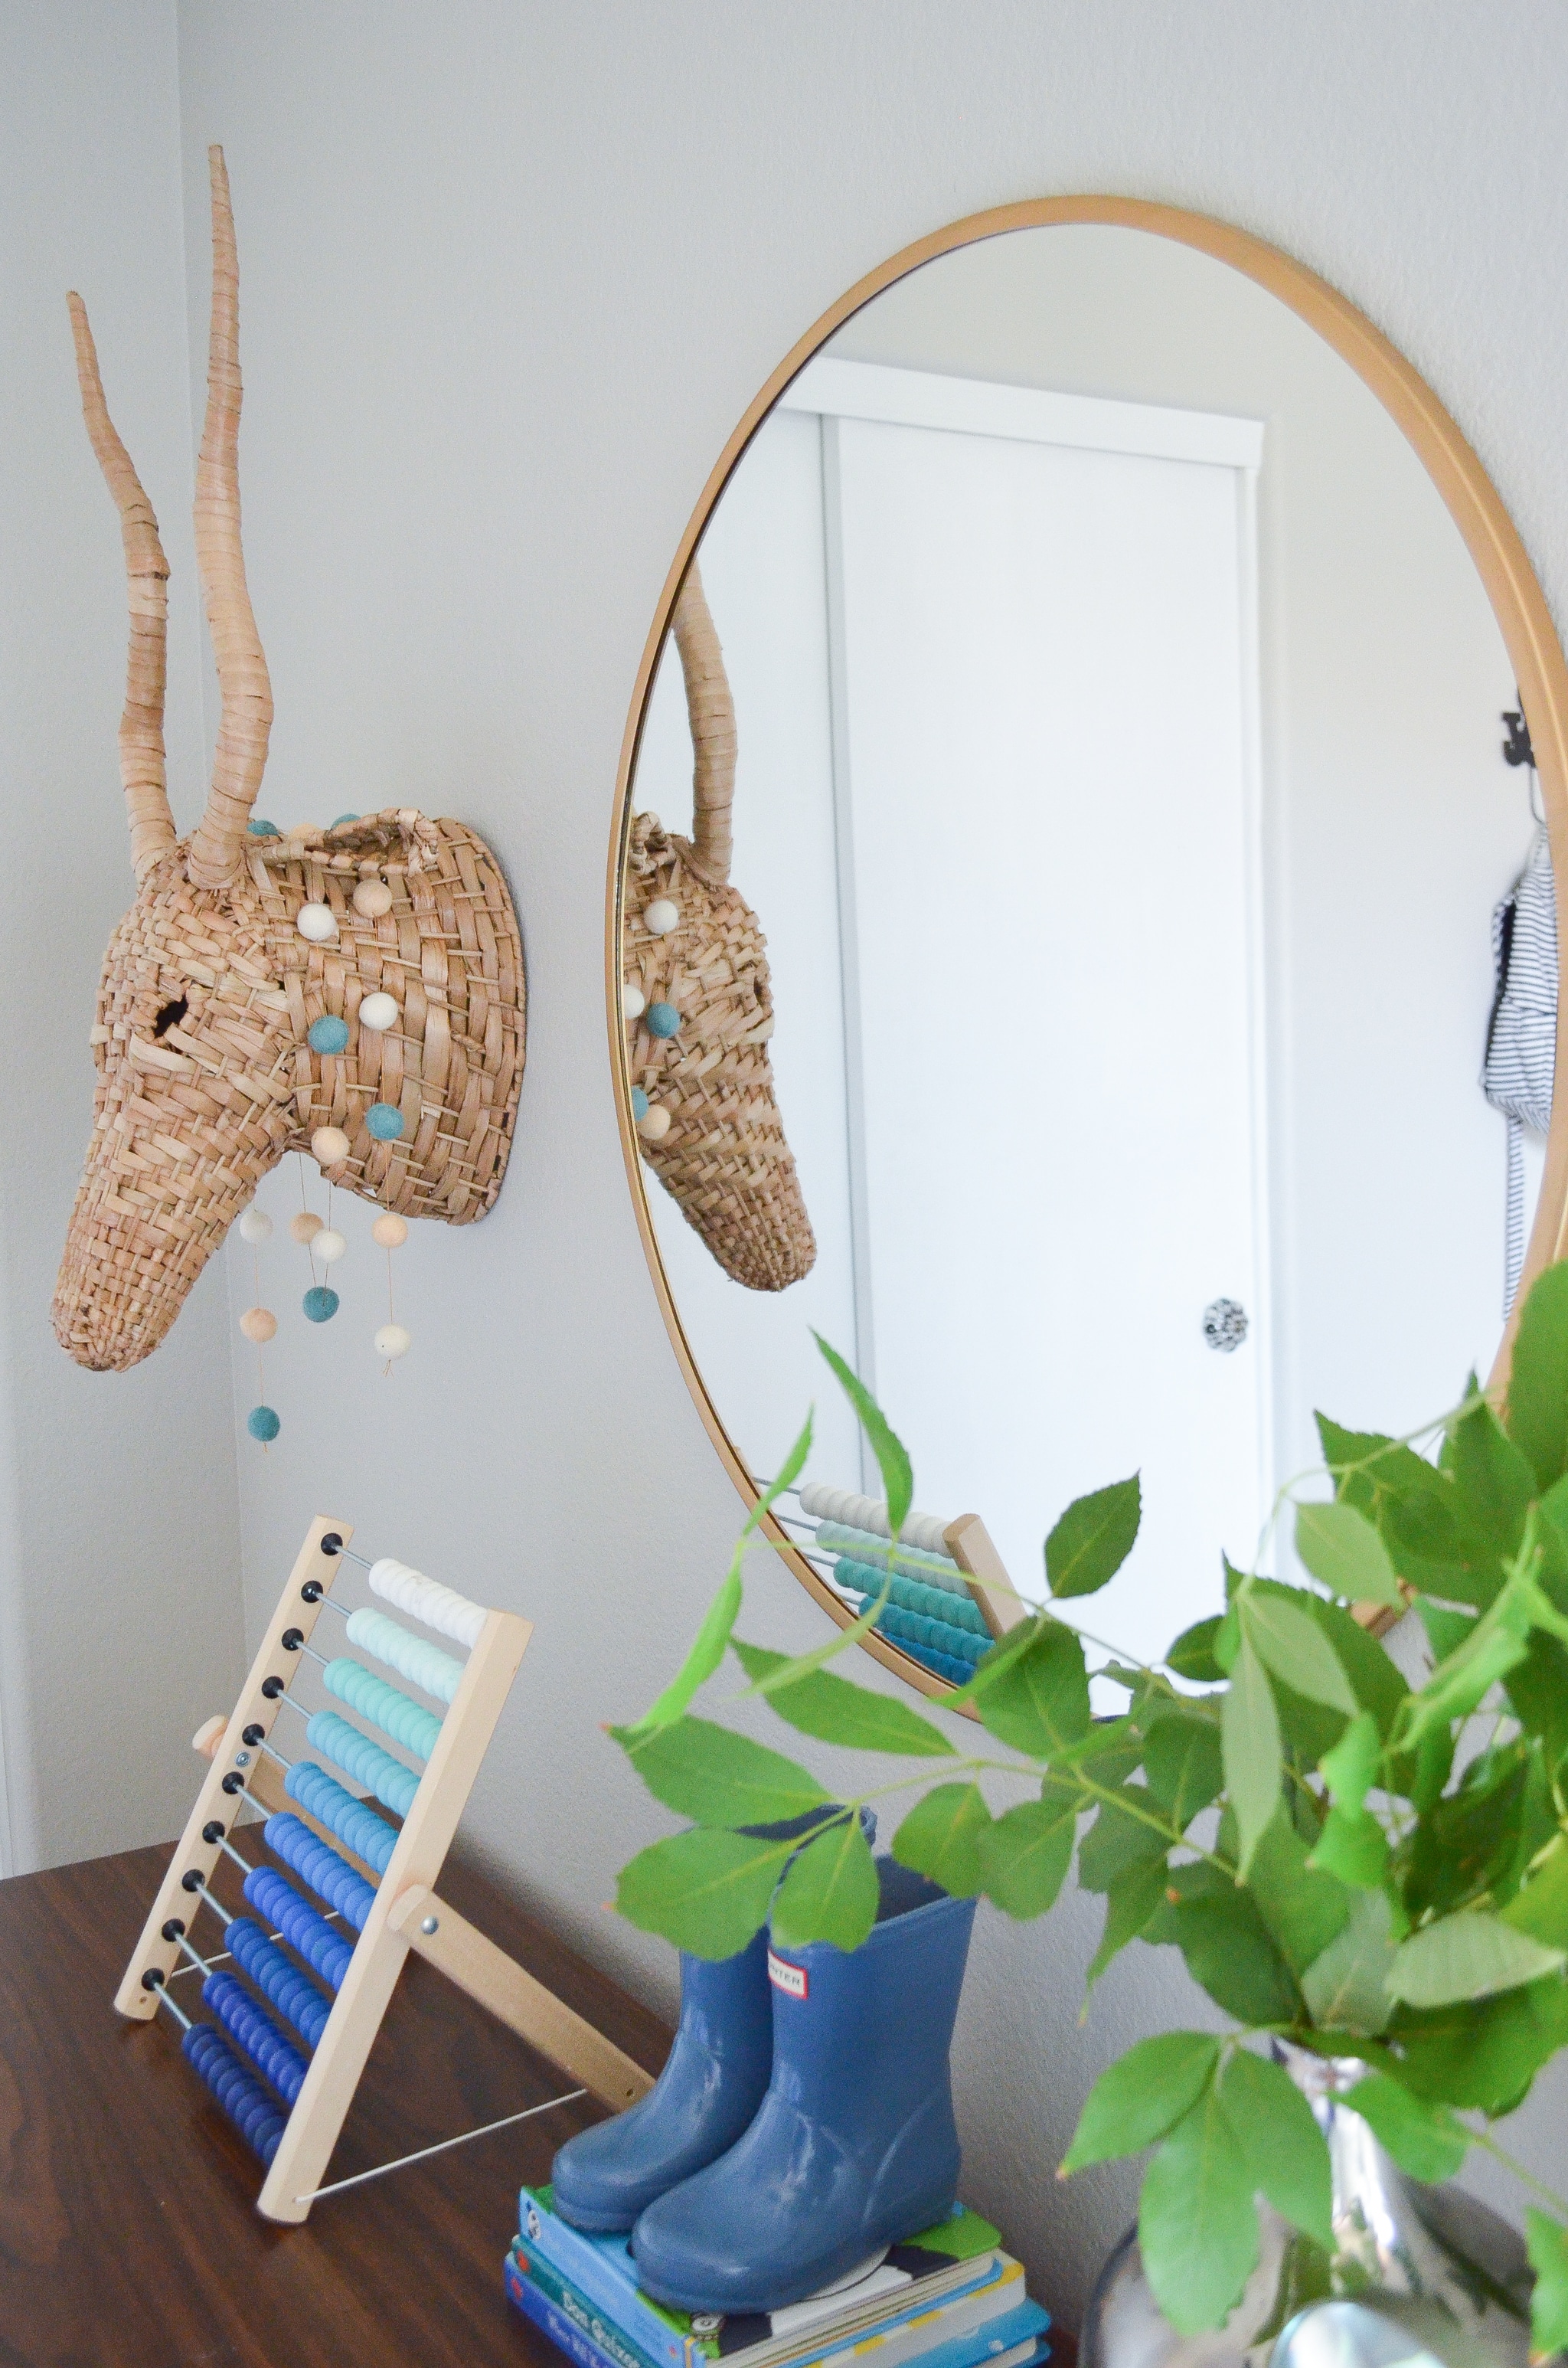 Ombre Abacus, Round Mirror and Animal Head in Boy's Room - Project Nursery